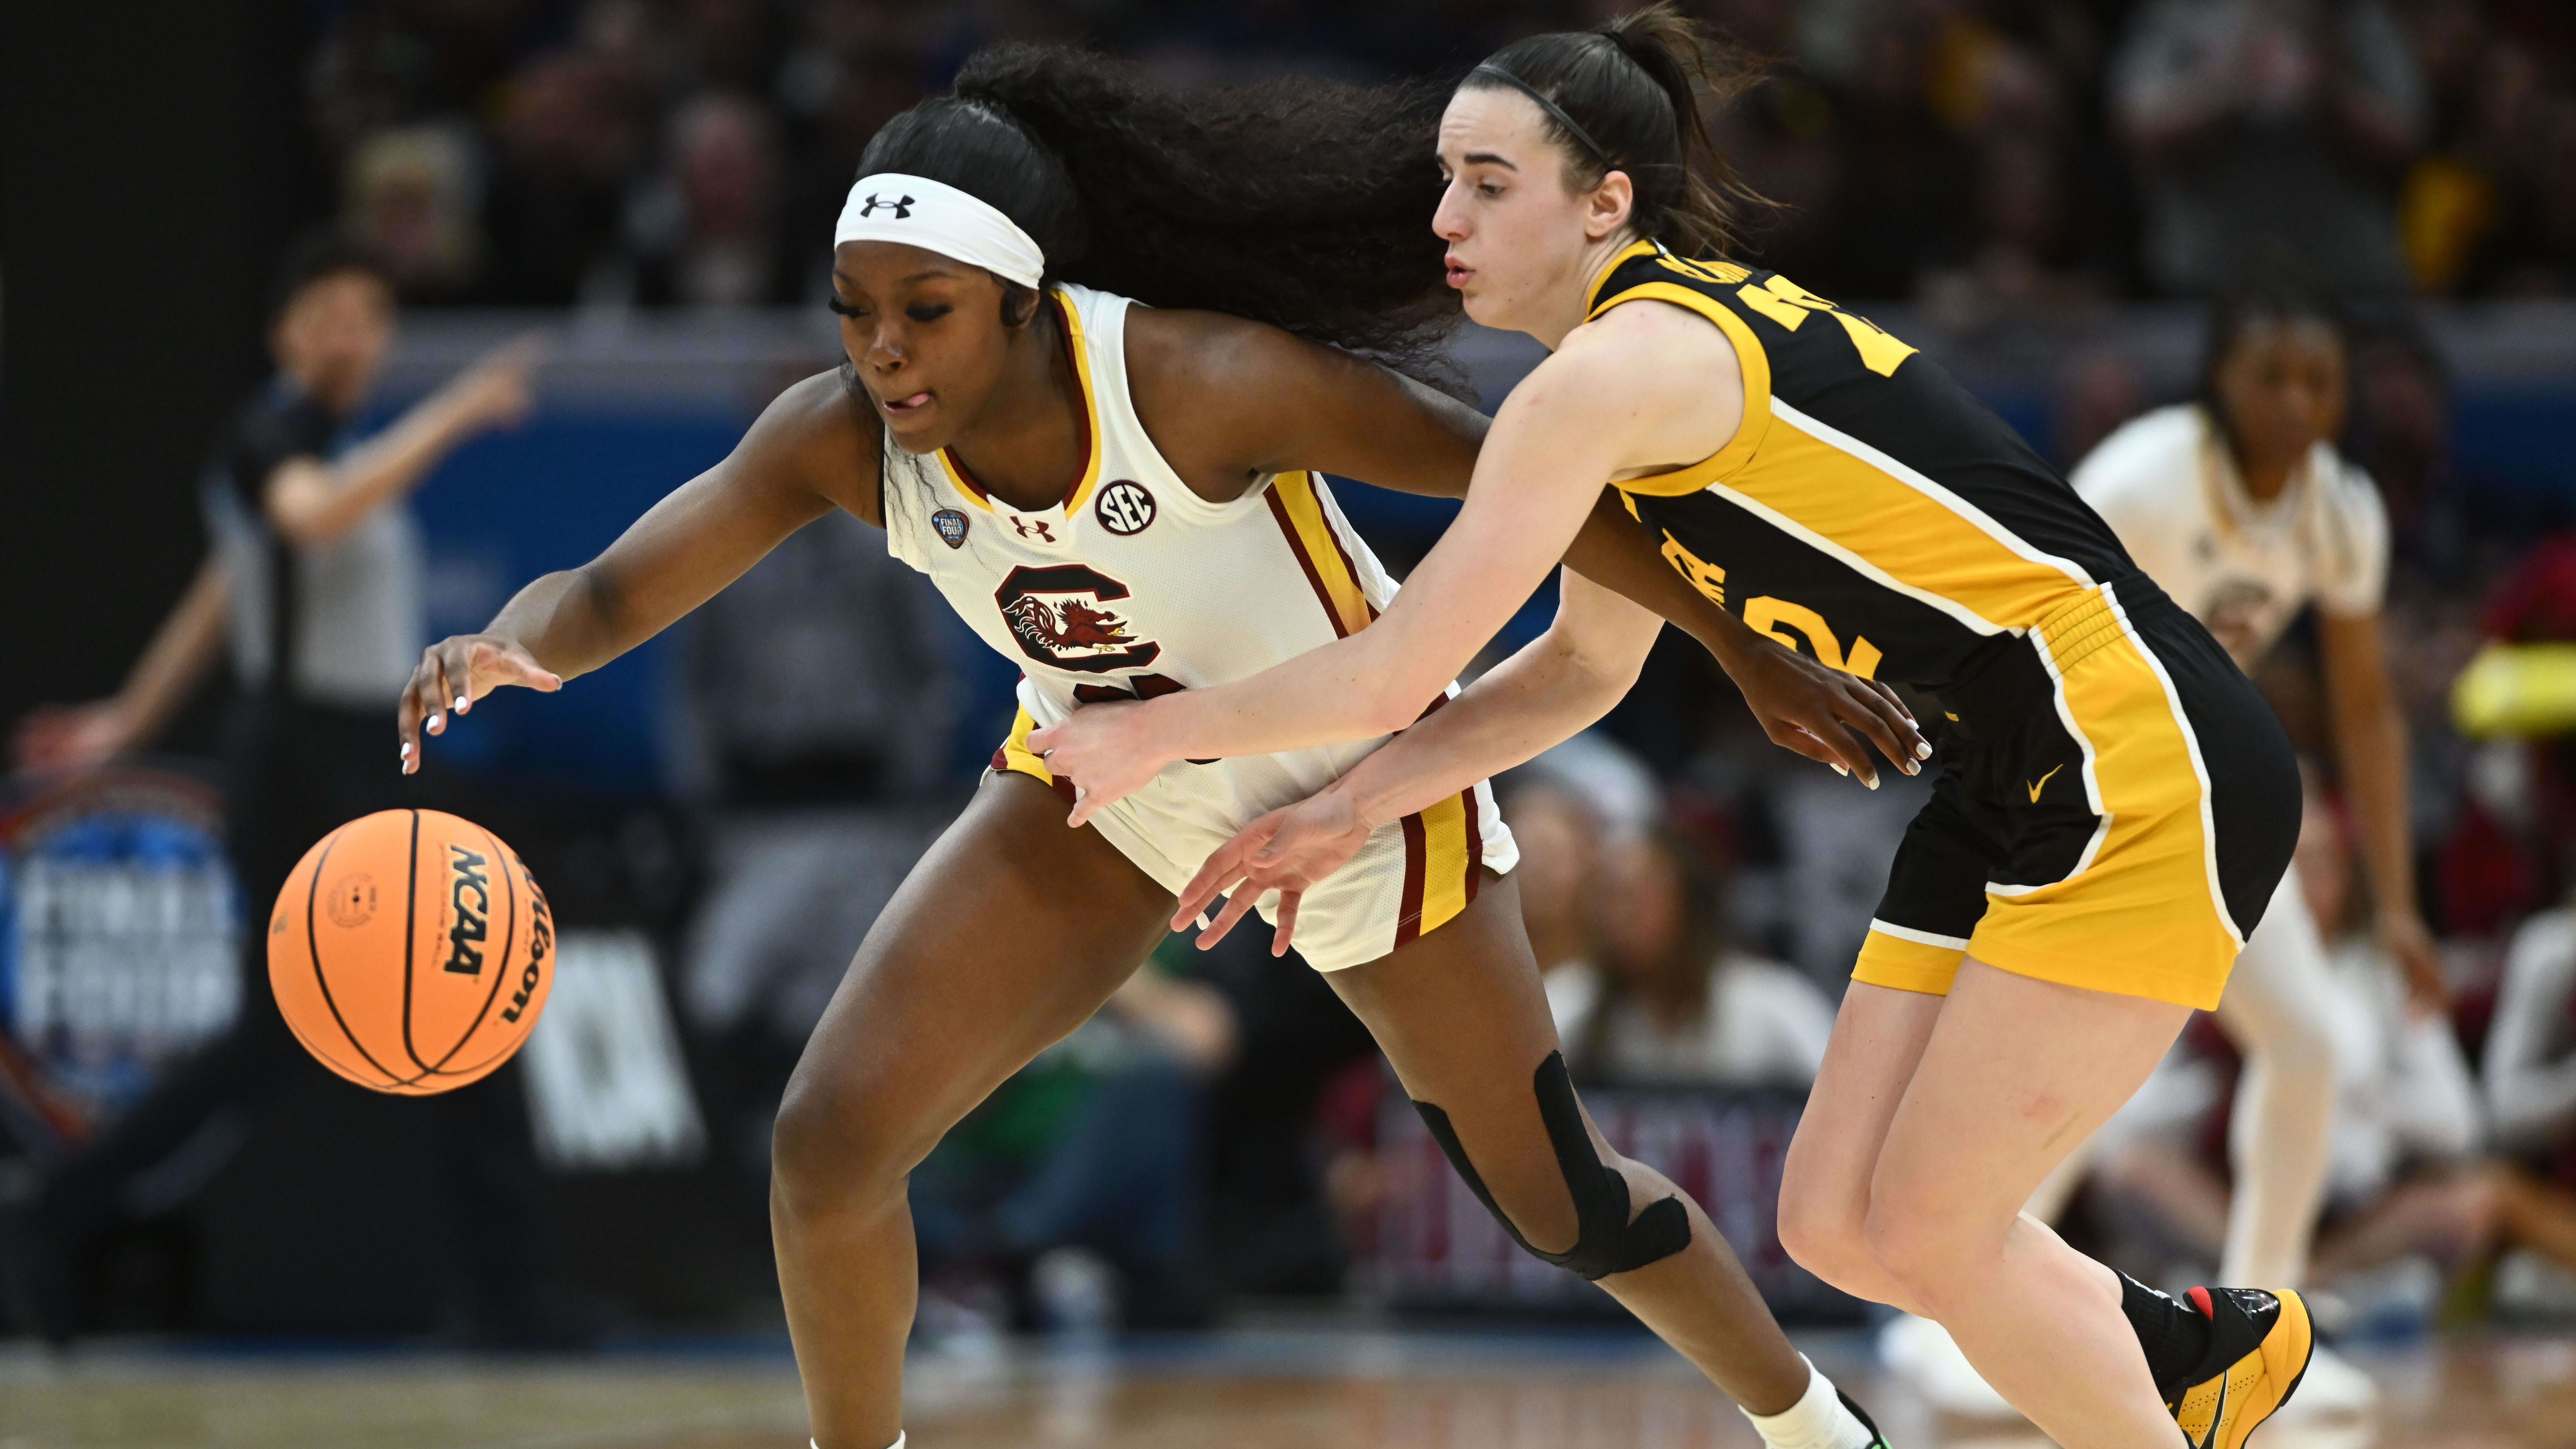 Johnson steals the ball from Clark during Sunday’s women’s national championship game.